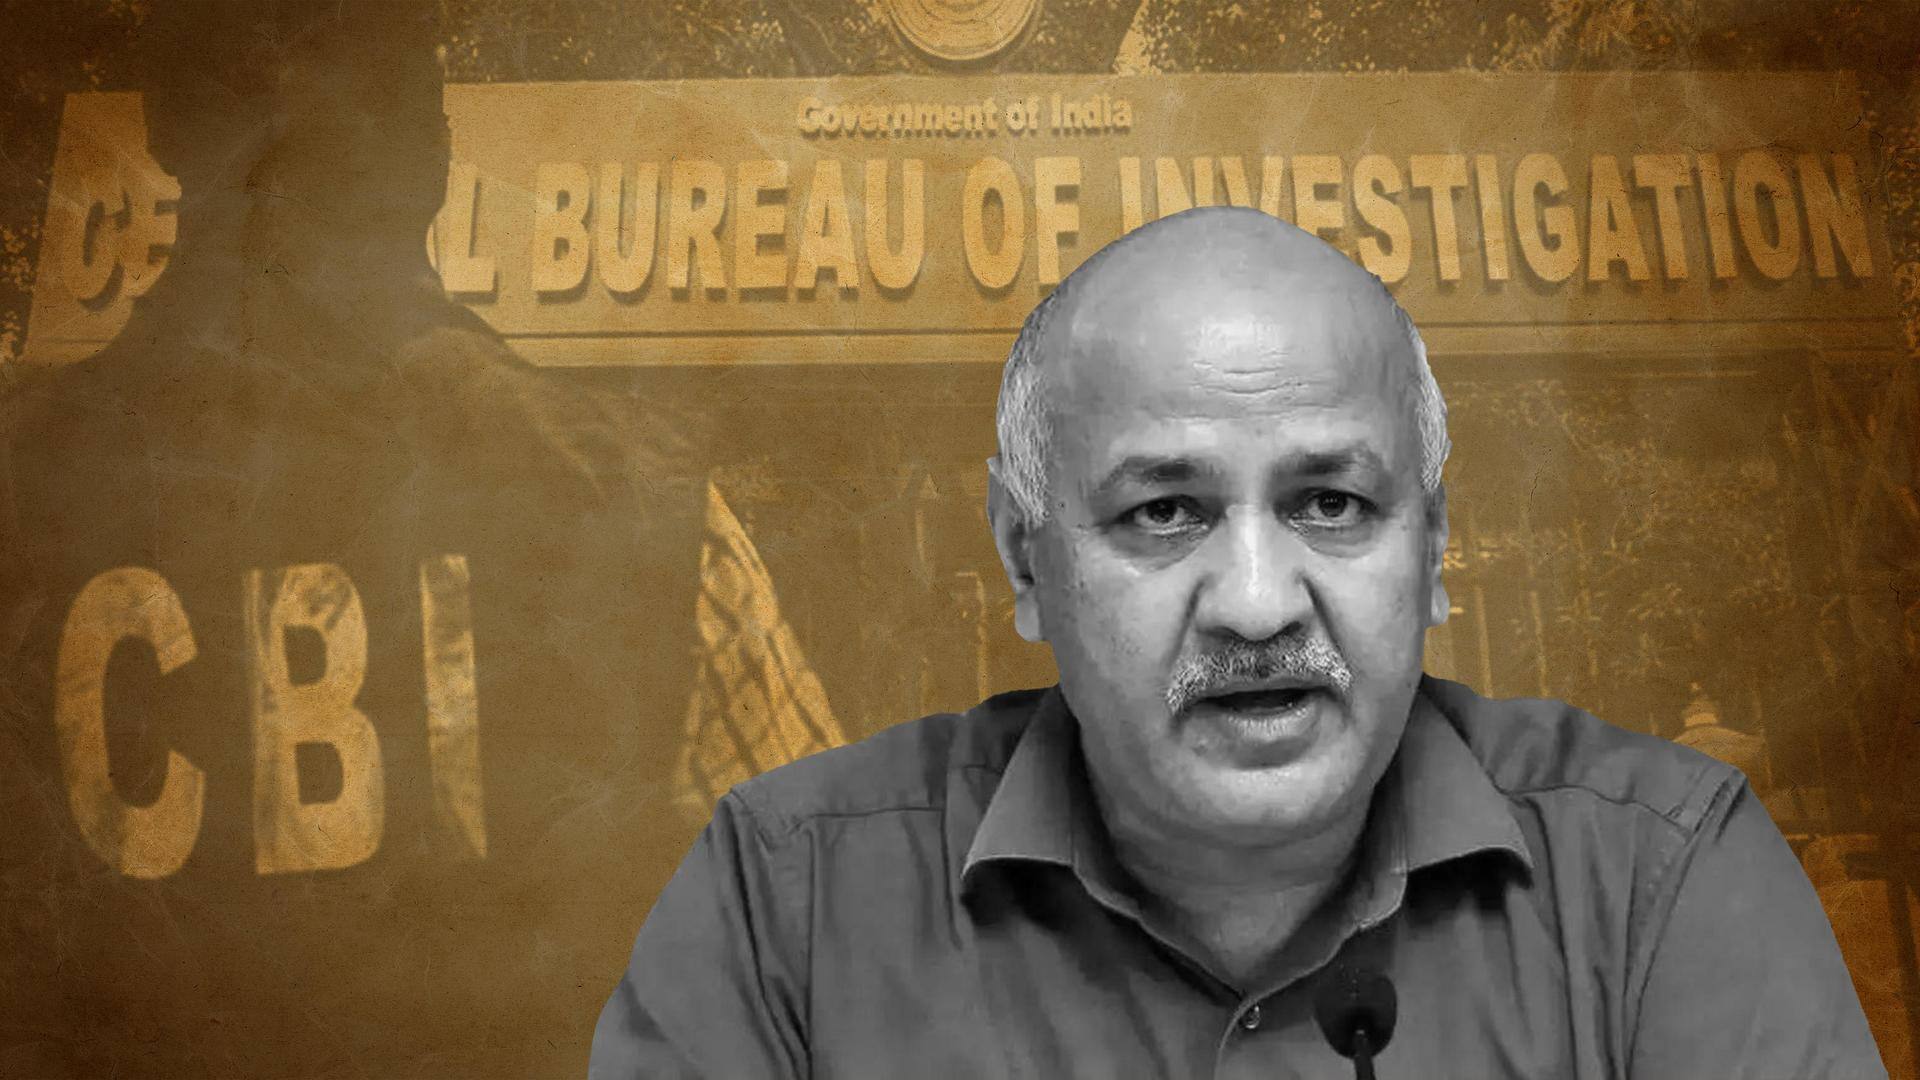 What conditions did court put for Manish Sisodia's custodial interrogation